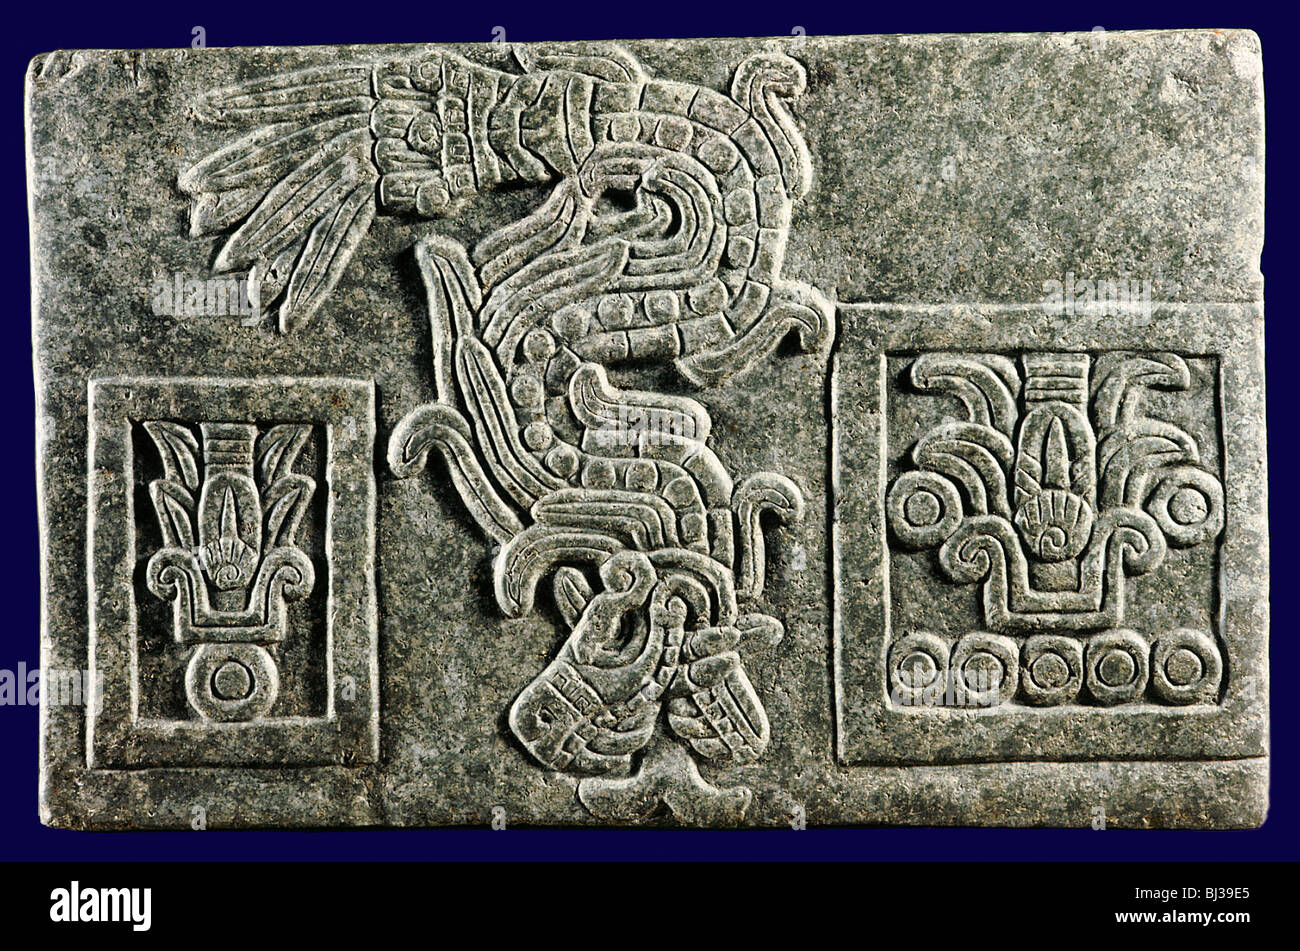 relief-of-the-aztec-god-quetzalcoatl-as-the-featered-serpent-aztec-BJ39E5.jpg